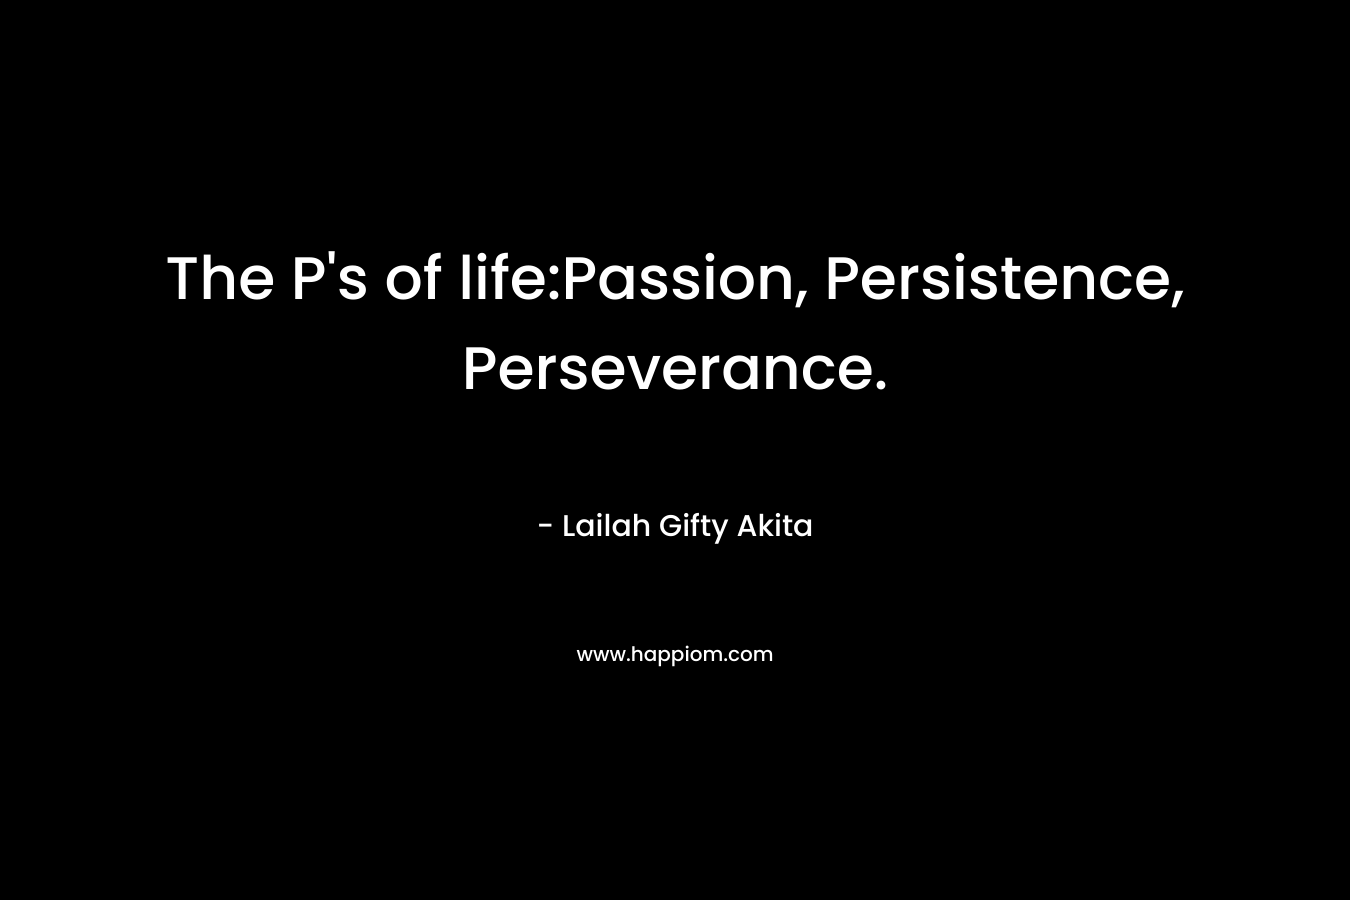 The P’s of life:Passion, Persistence, Perseverance. – Lailah Gifty Akita